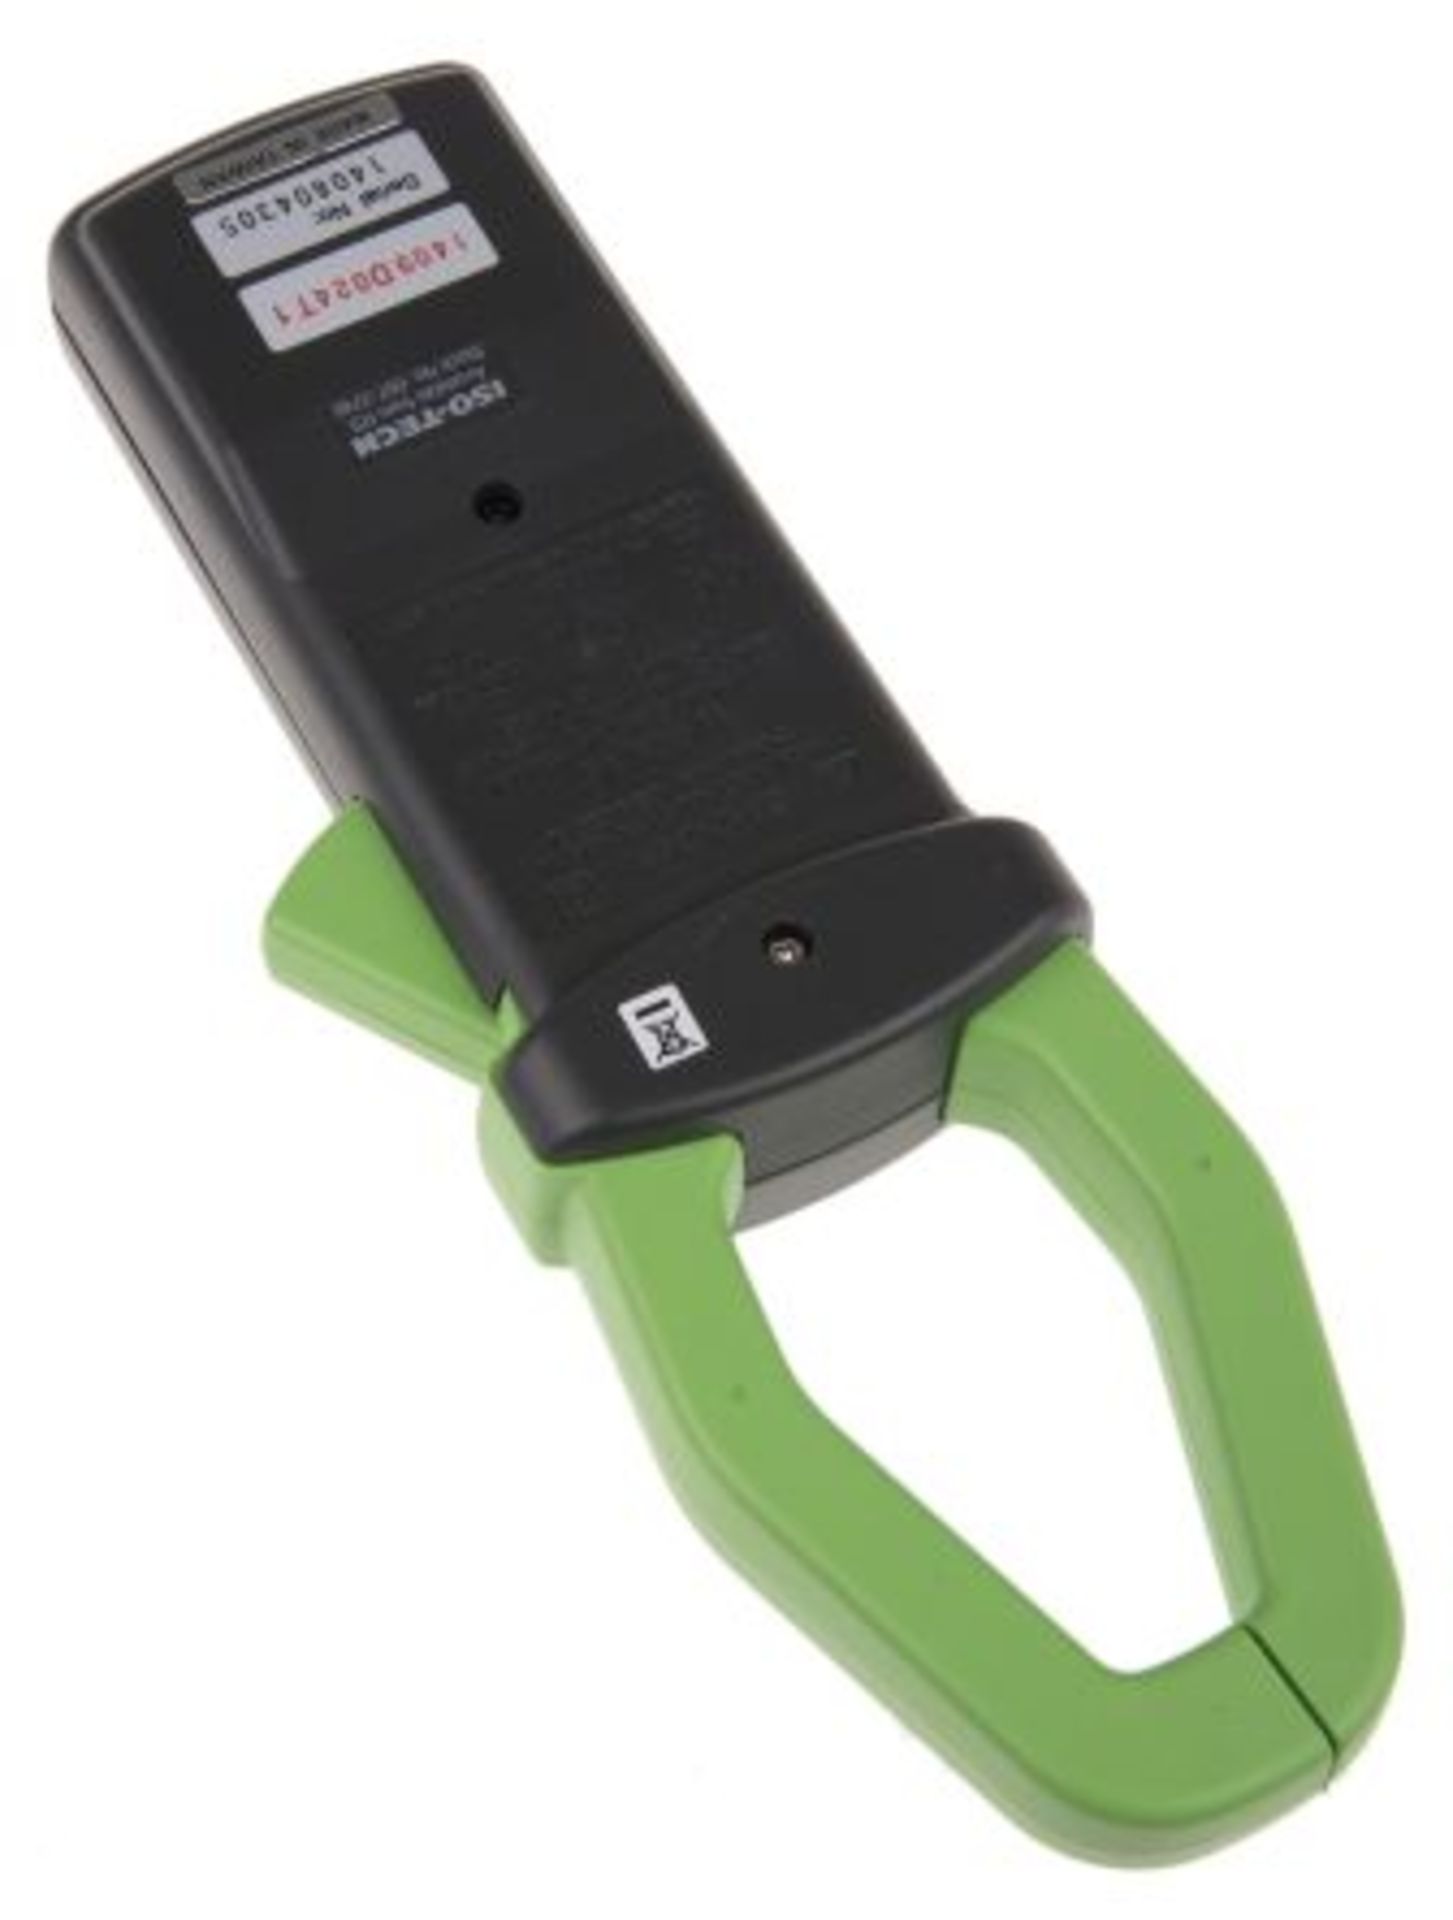 ISO-TECH IPM3000N HVAC Power Clamp Meter, Max Current 999.9A ac CAT III 600 V - Image 2 of 3